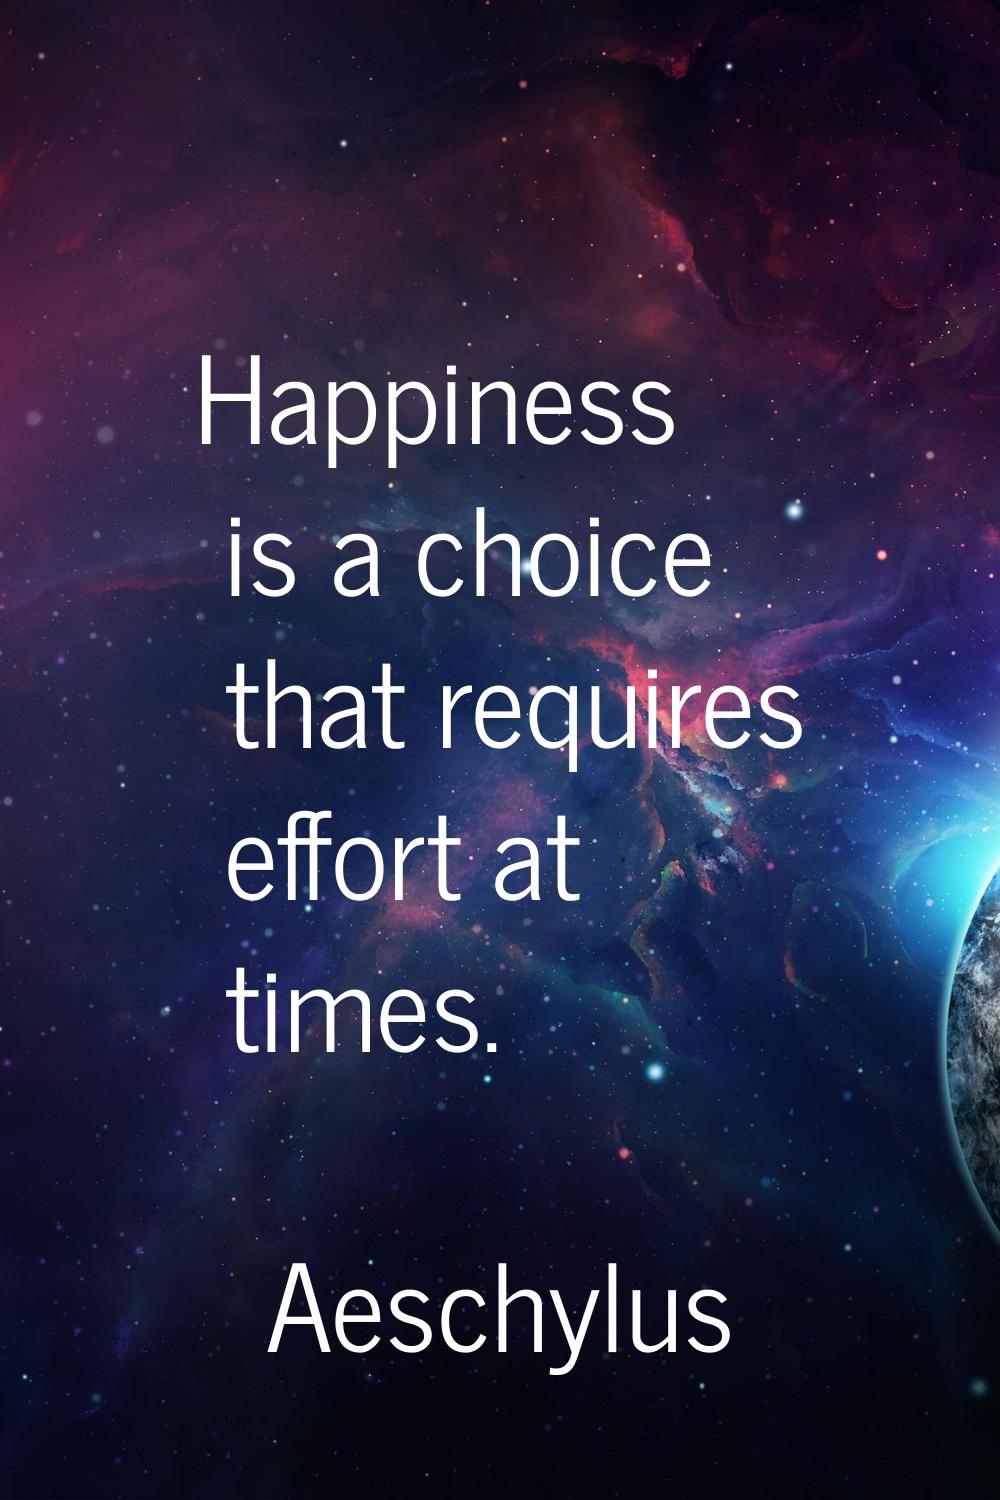 Happiness is a choice that requires effort at times.